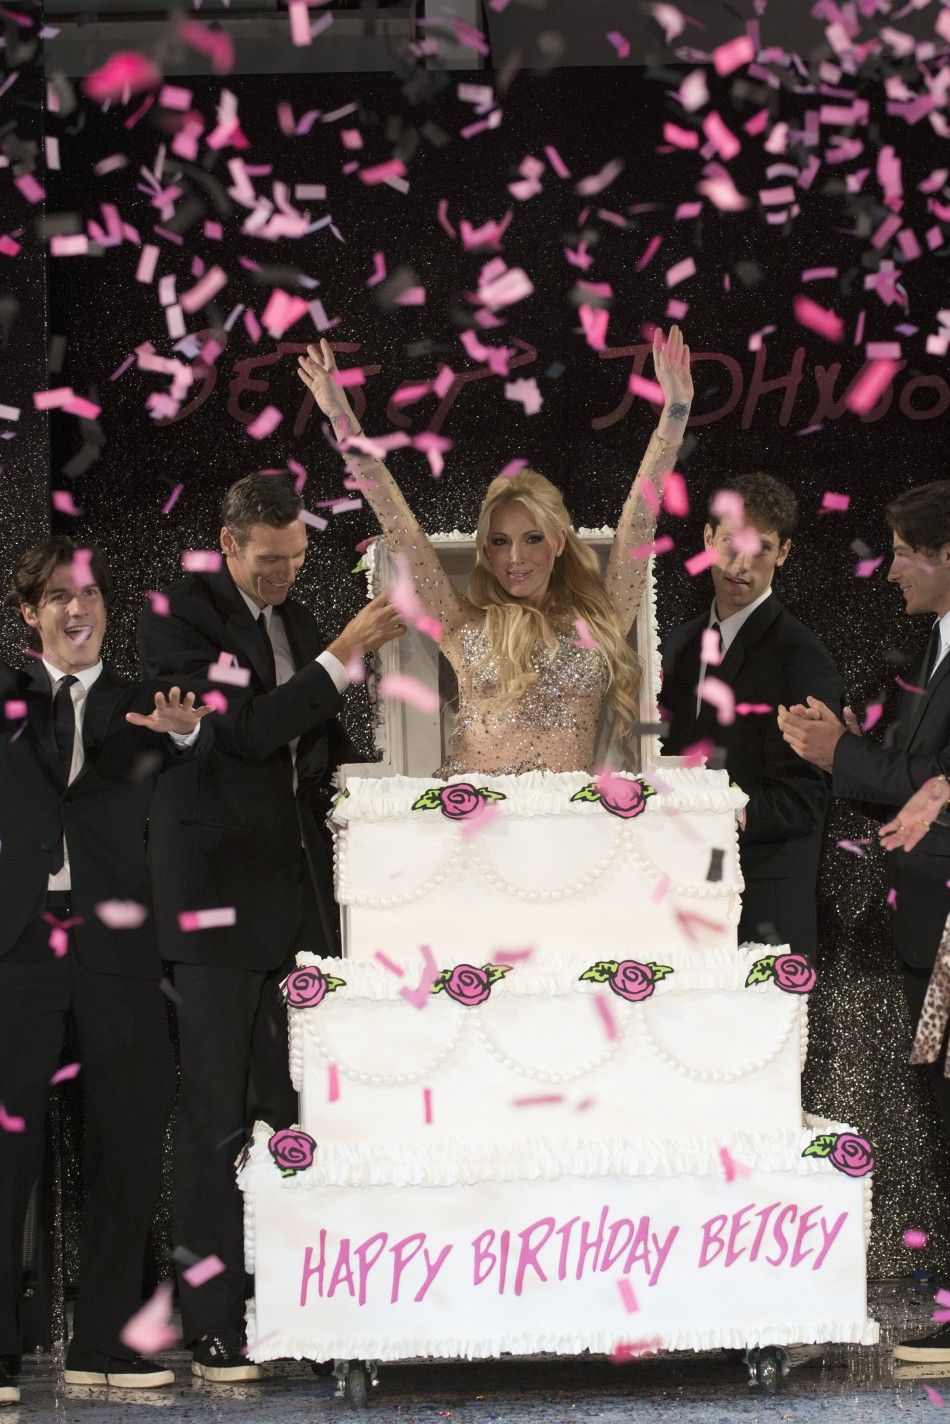 Lulu Johnson, the daughter of fashion designer Betsey Johnson, pops out of a mock-up of a cake for her mother at Betsey Johnsons retrospective fashion show and 70th birthday party during New York Fashion Week September 11, 2012. 